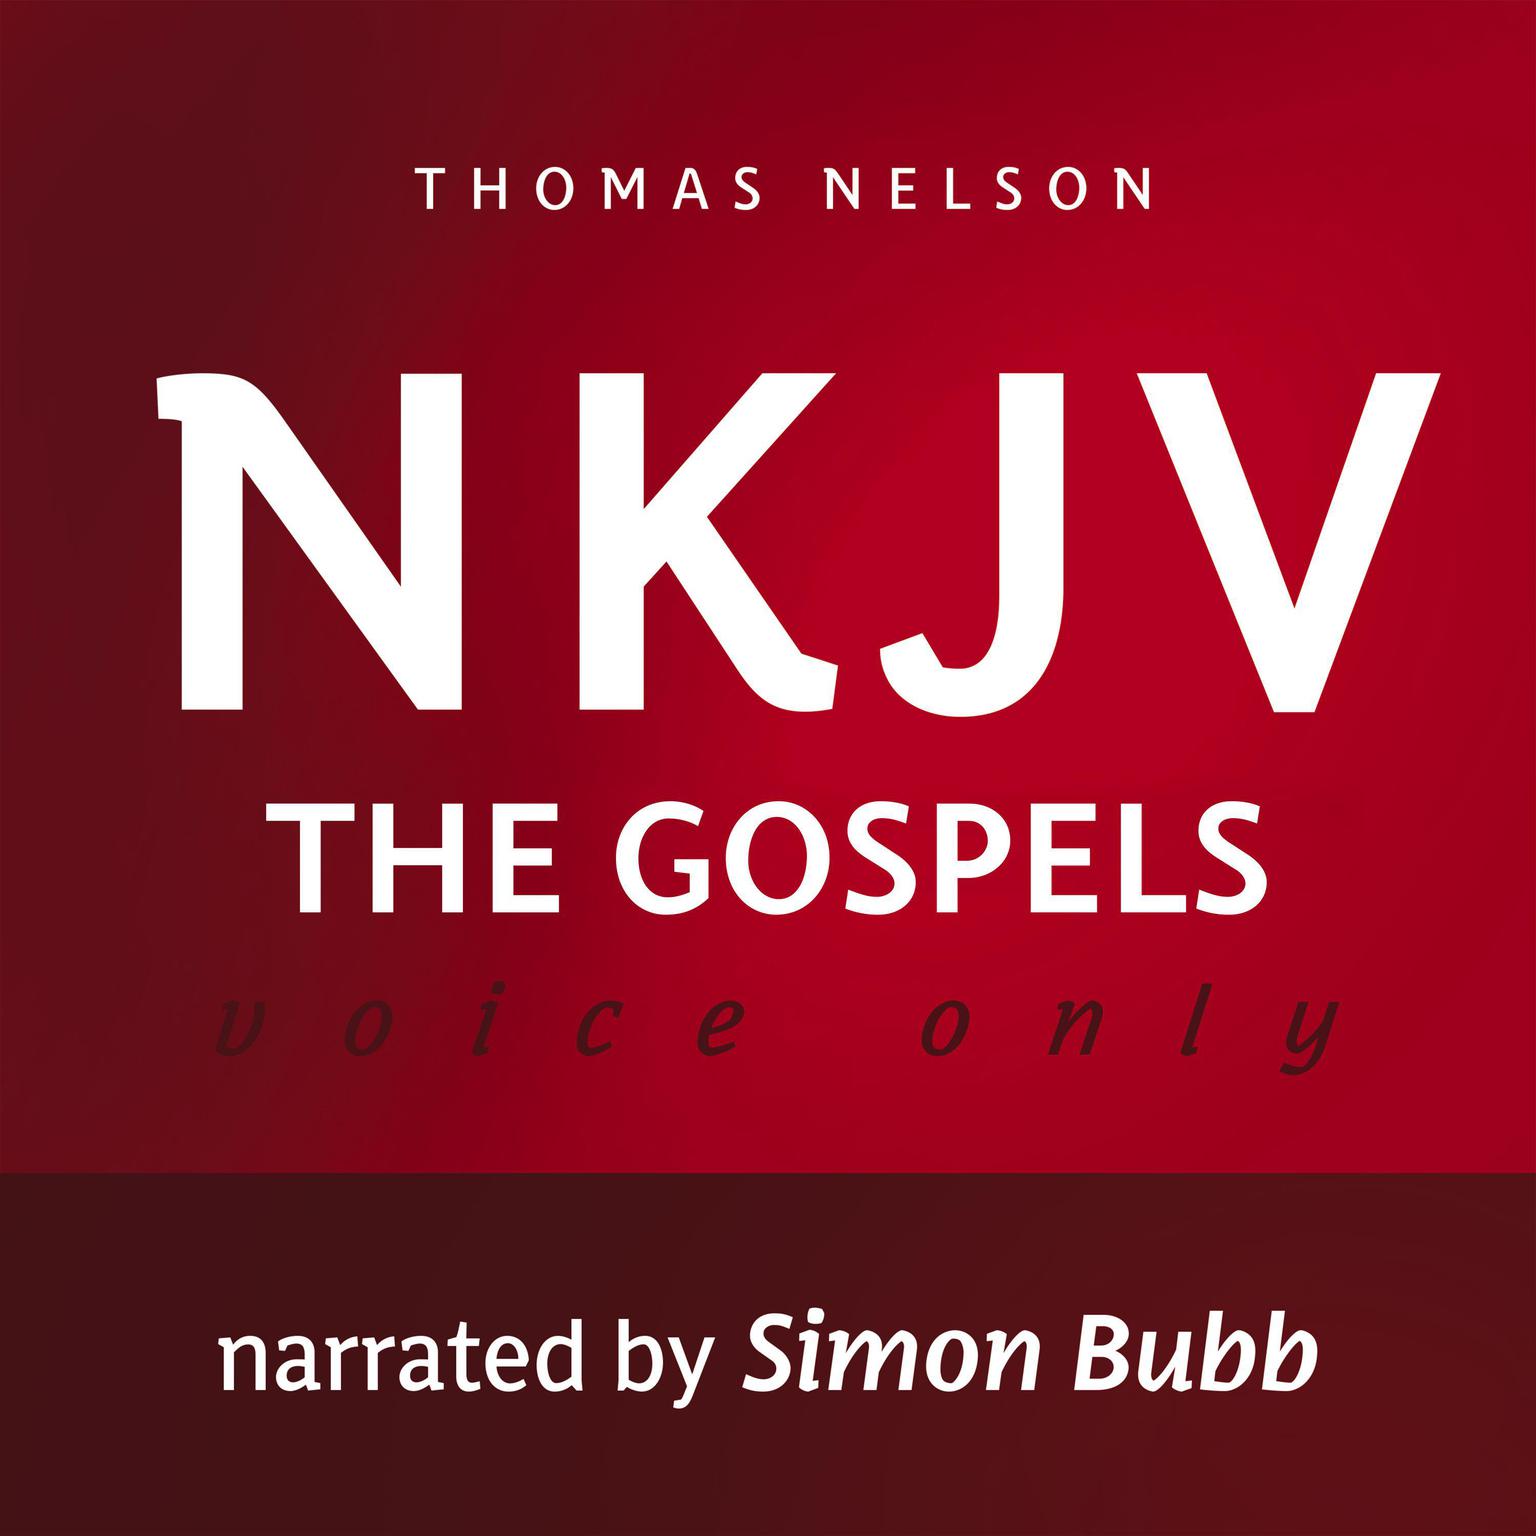 Voice Only Audio Bible - New King James Version, NKJV (Narrated by Simon Bubb): The Gospels: Holy Bible, New King James Version Audiobook, by Thomas Nelson